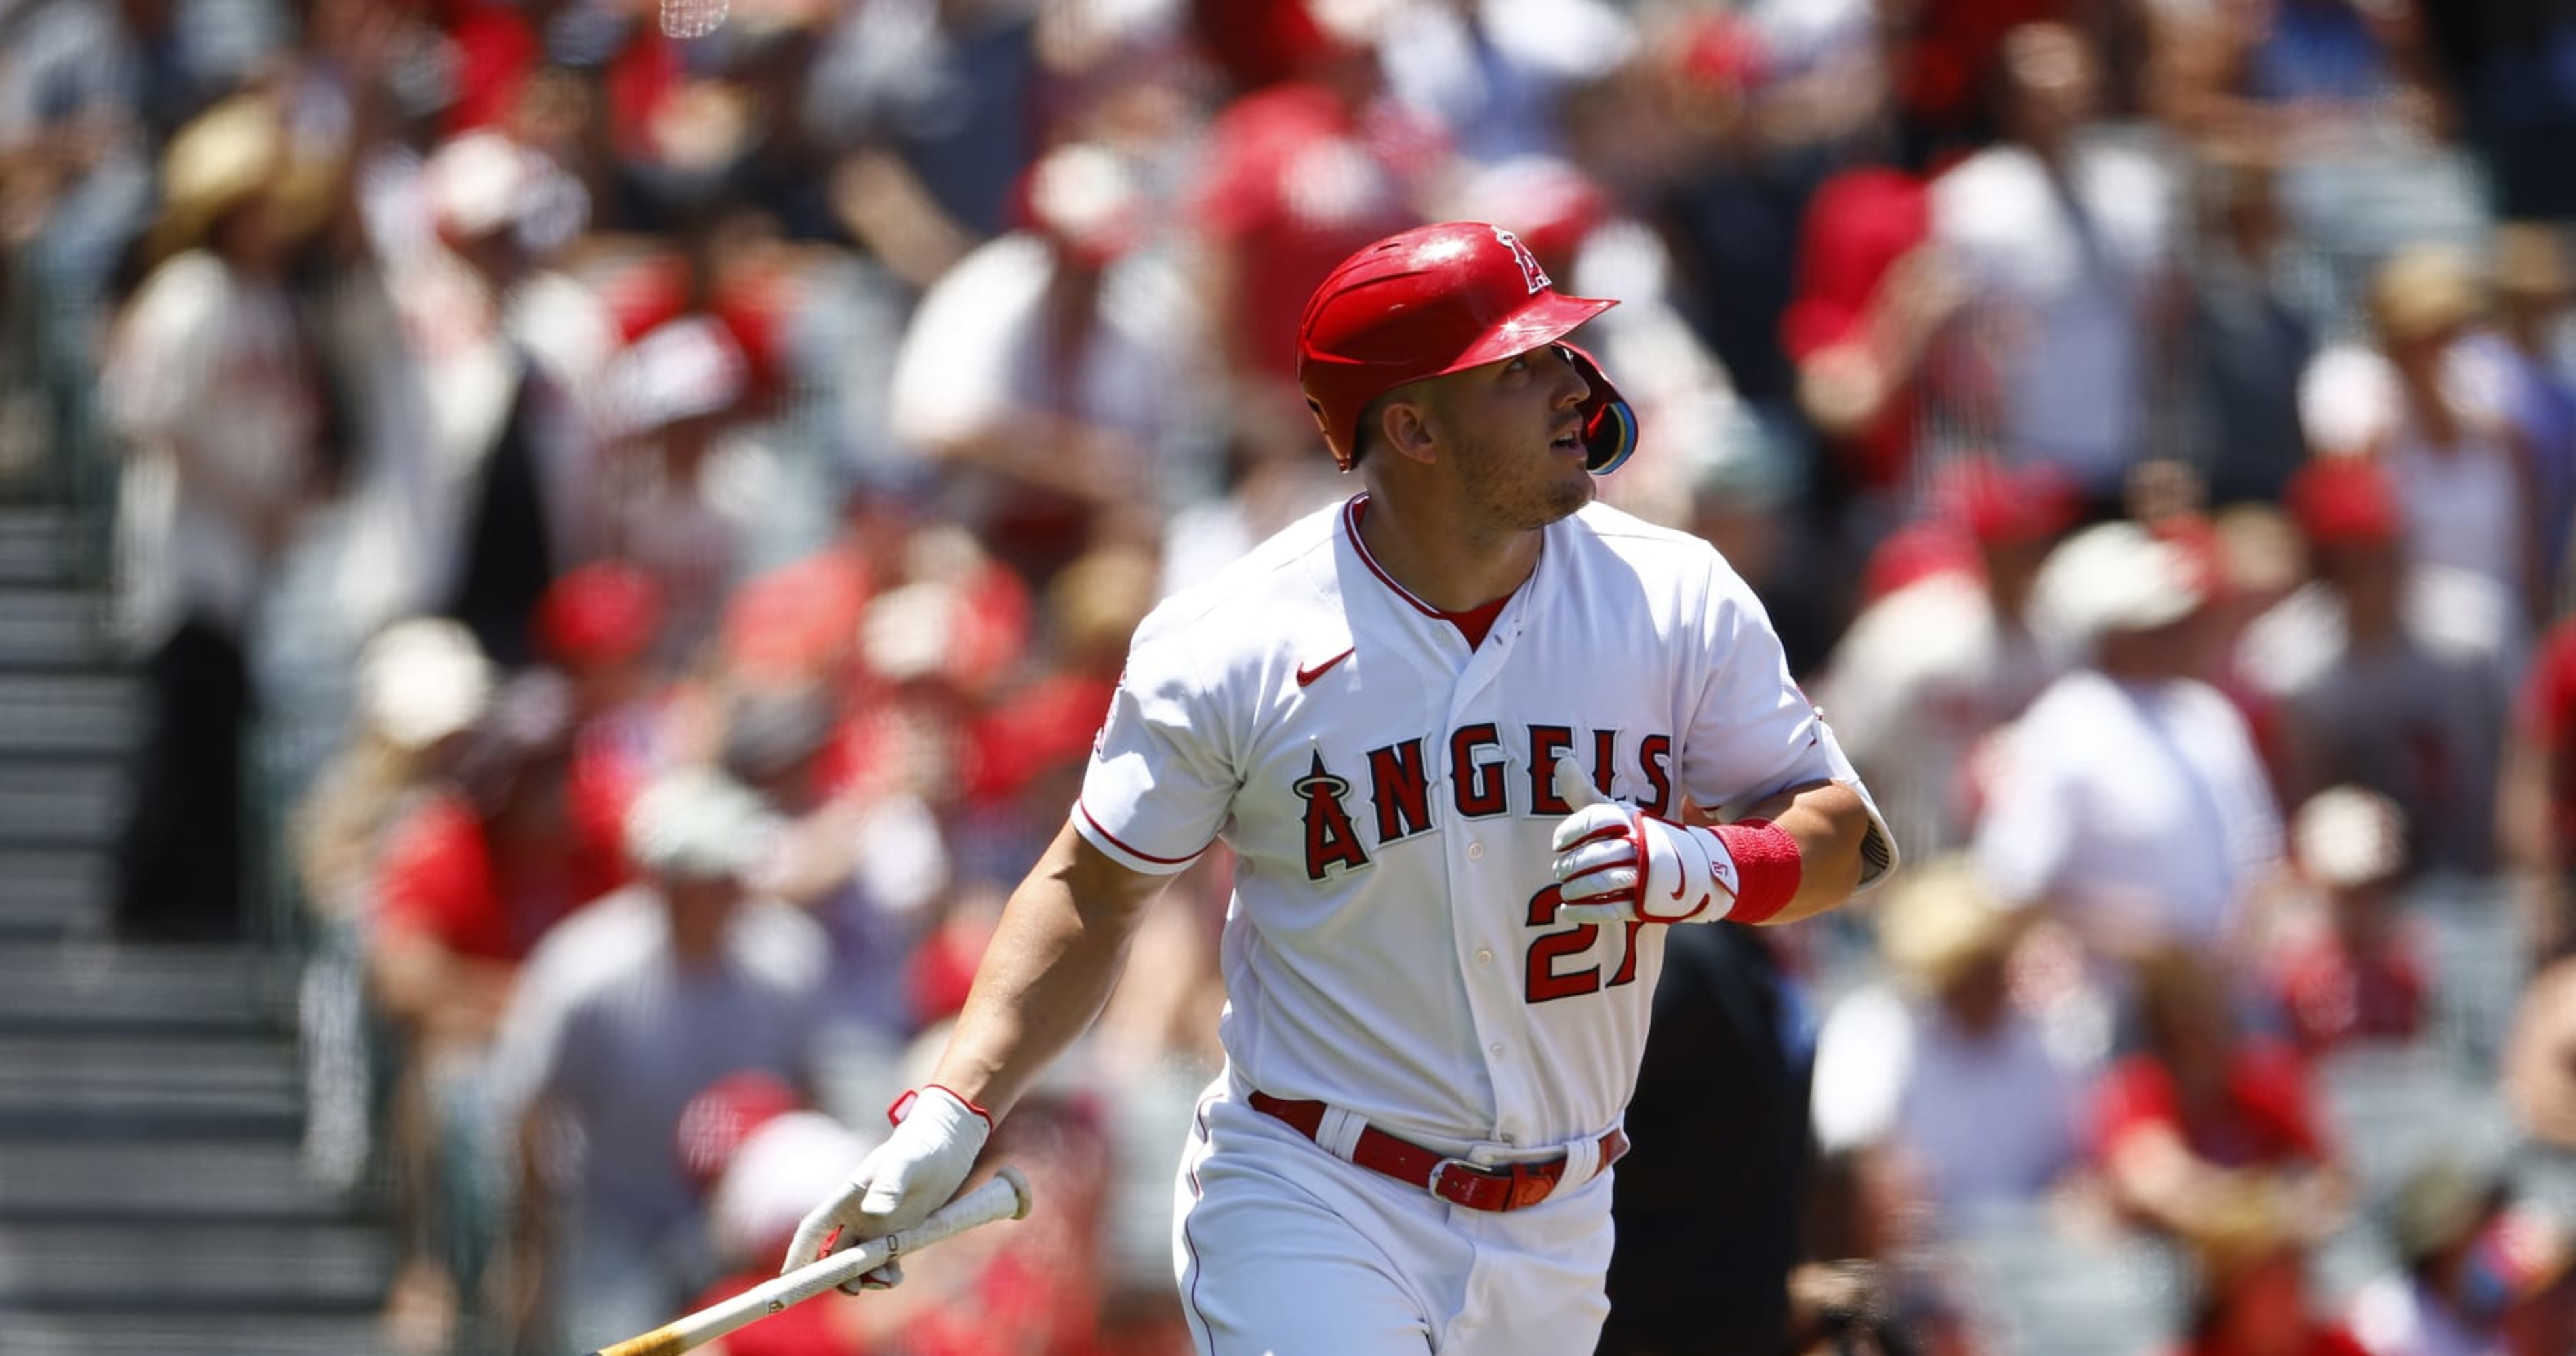 MLB The Show: What Would Happen if Trout and Harper Swapped Teams?